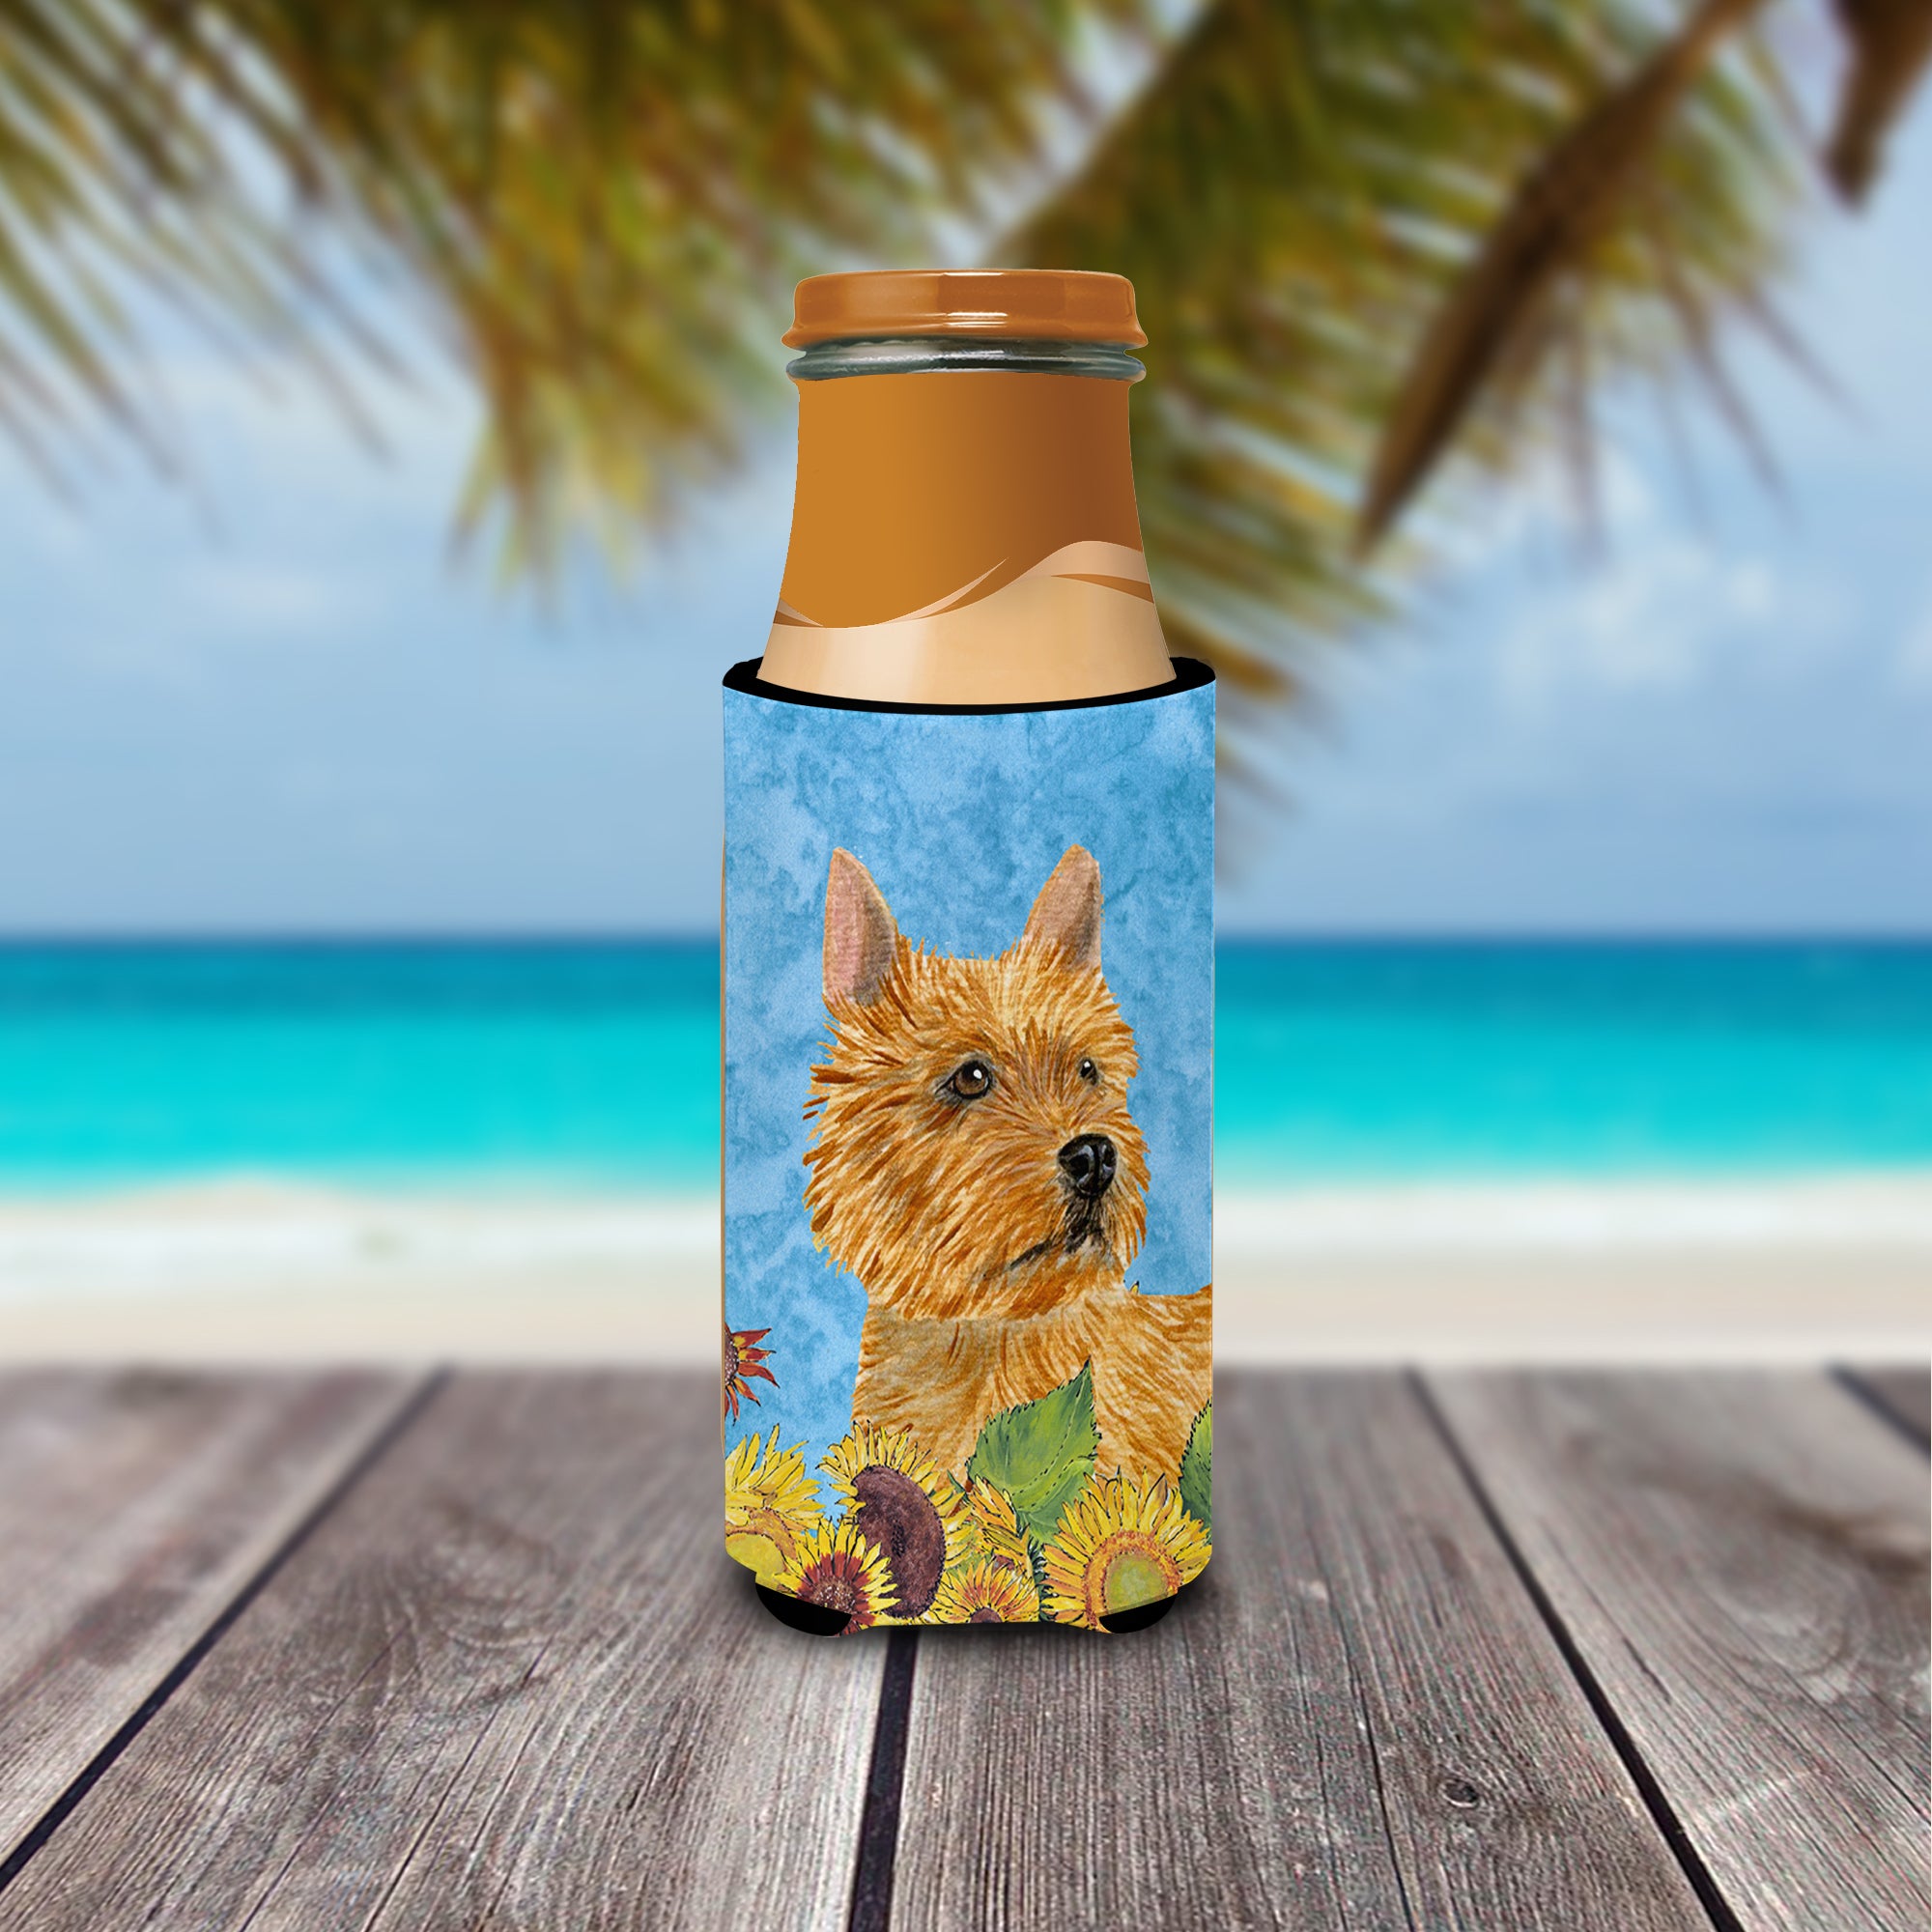 Norwich Terrier in Summer Flowers Ultra Beverage Isolateurs pour canettes minces SS4132MUK